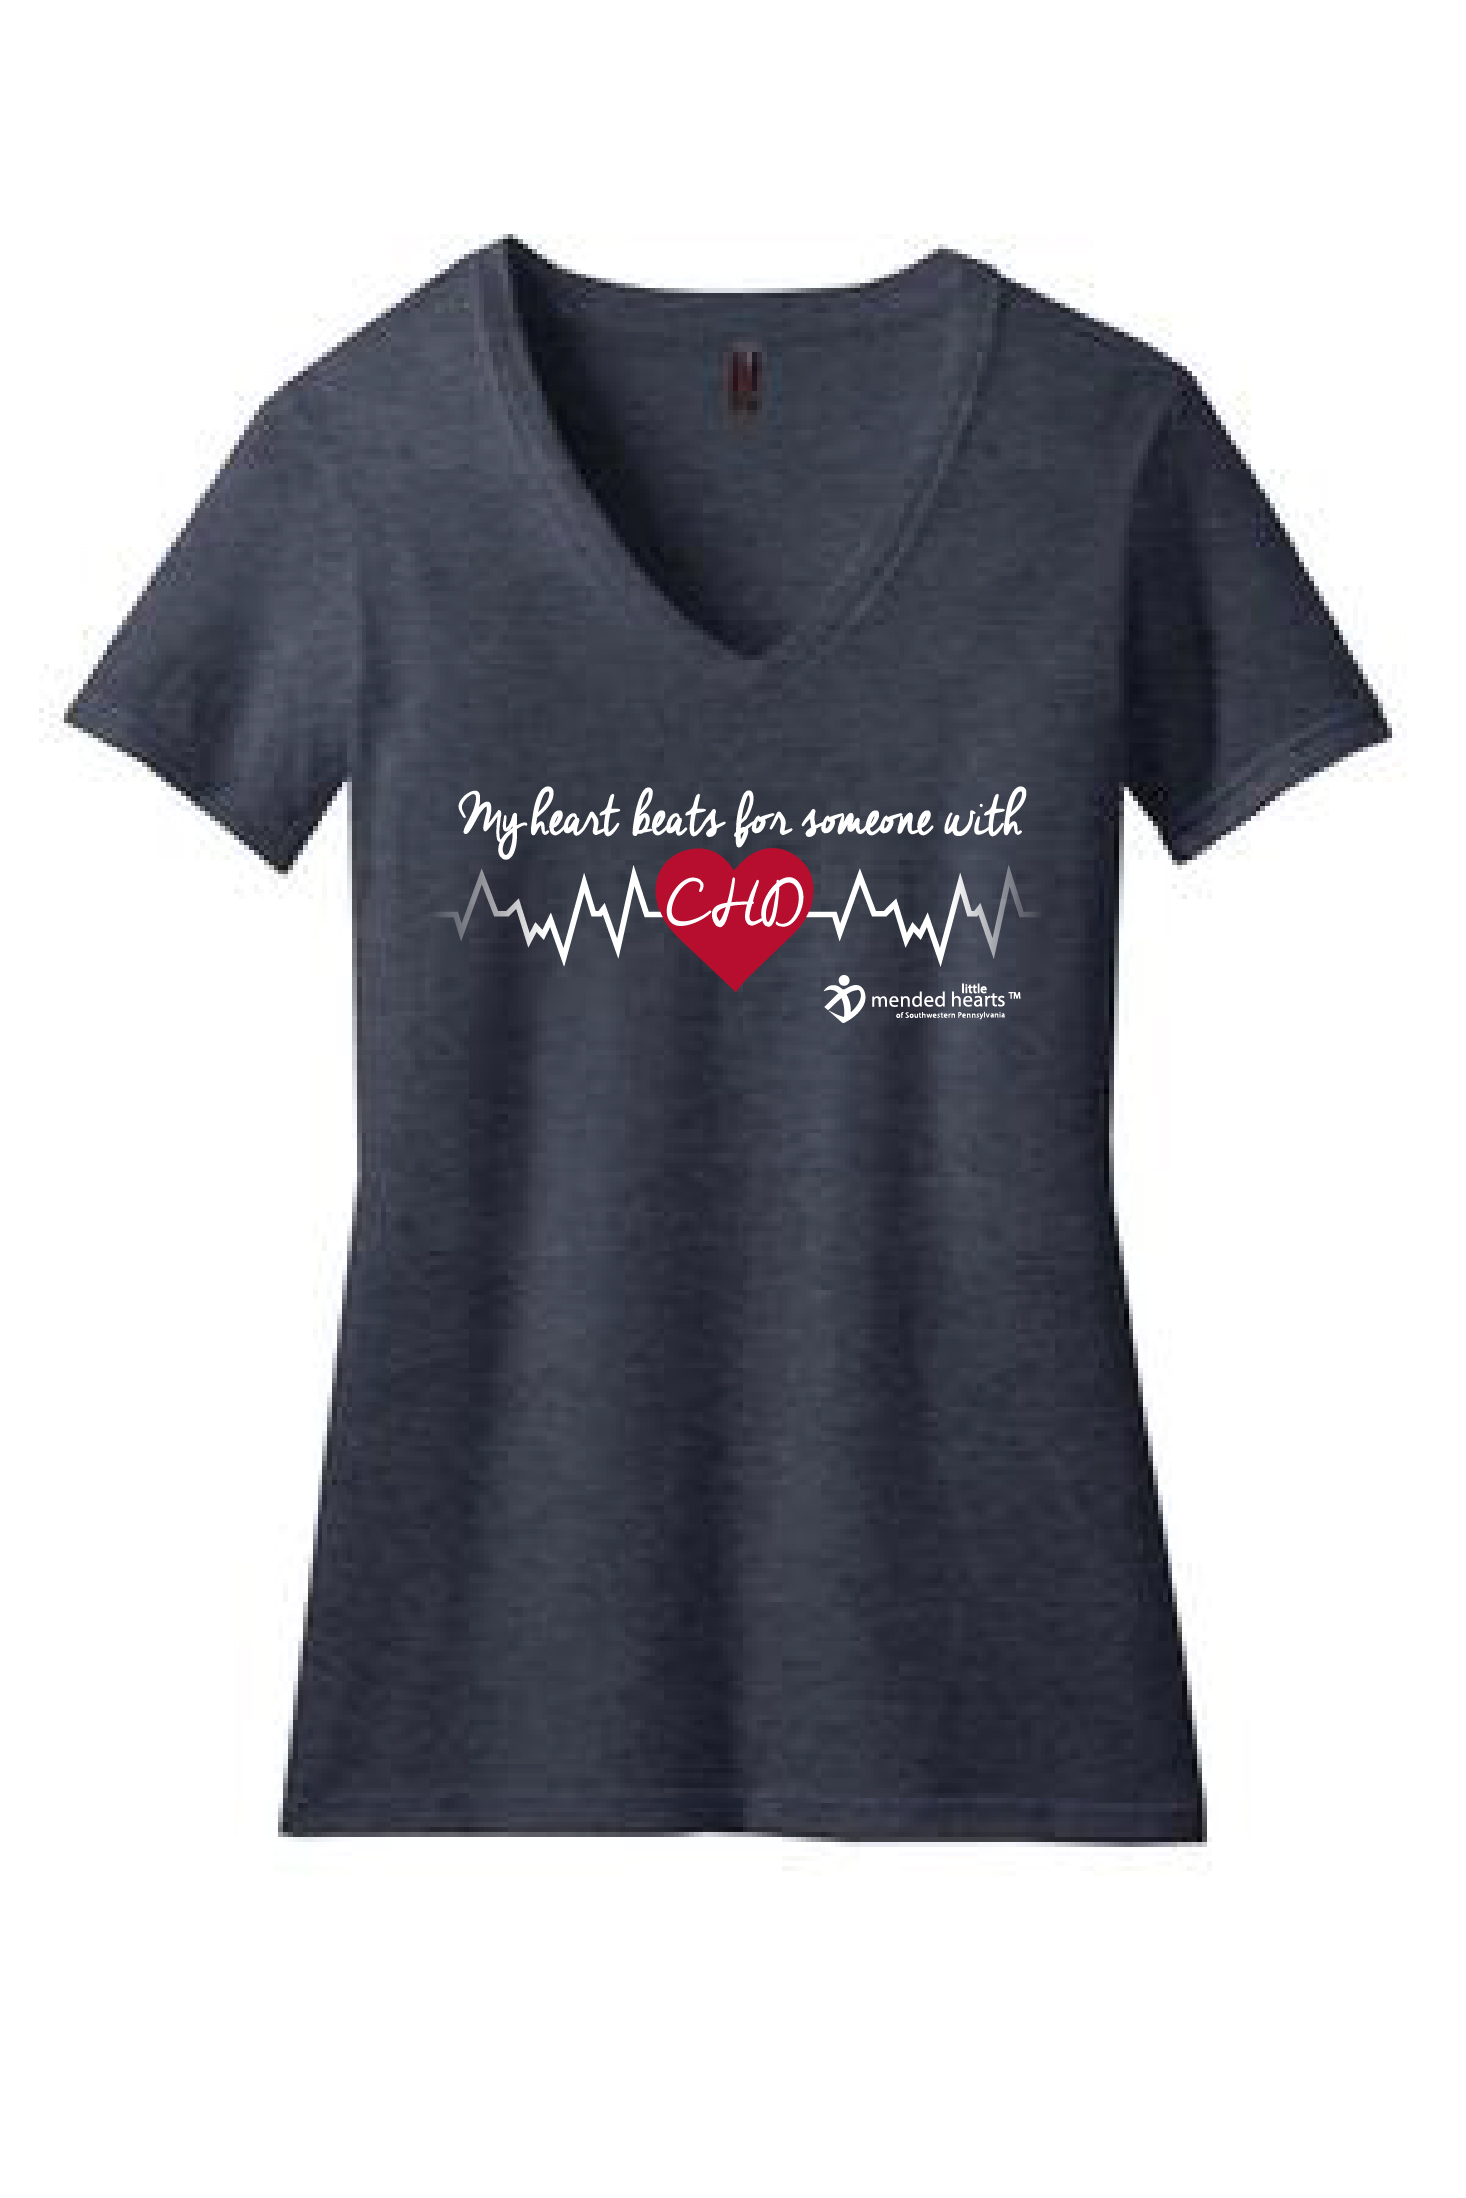 My Heart Beats for Someone with CHD, Ladies' V-Neck, Available in Multiple Colors!